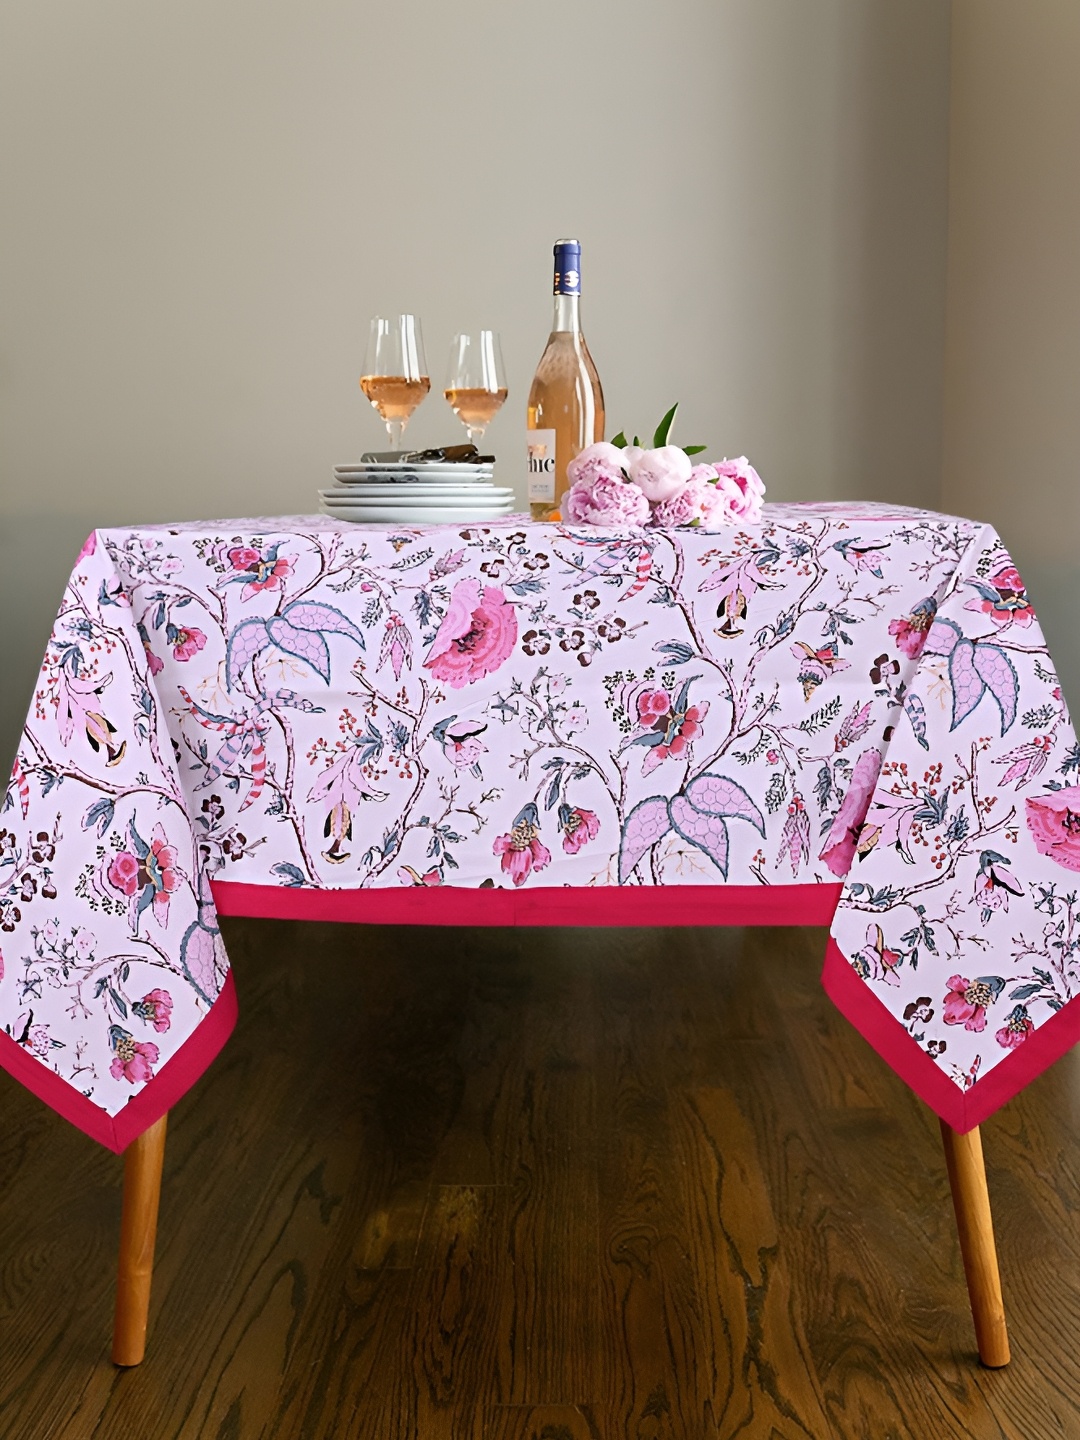 

Texstylers Pink Floral Anti-Skid Cotton 8-Seater Table Cover